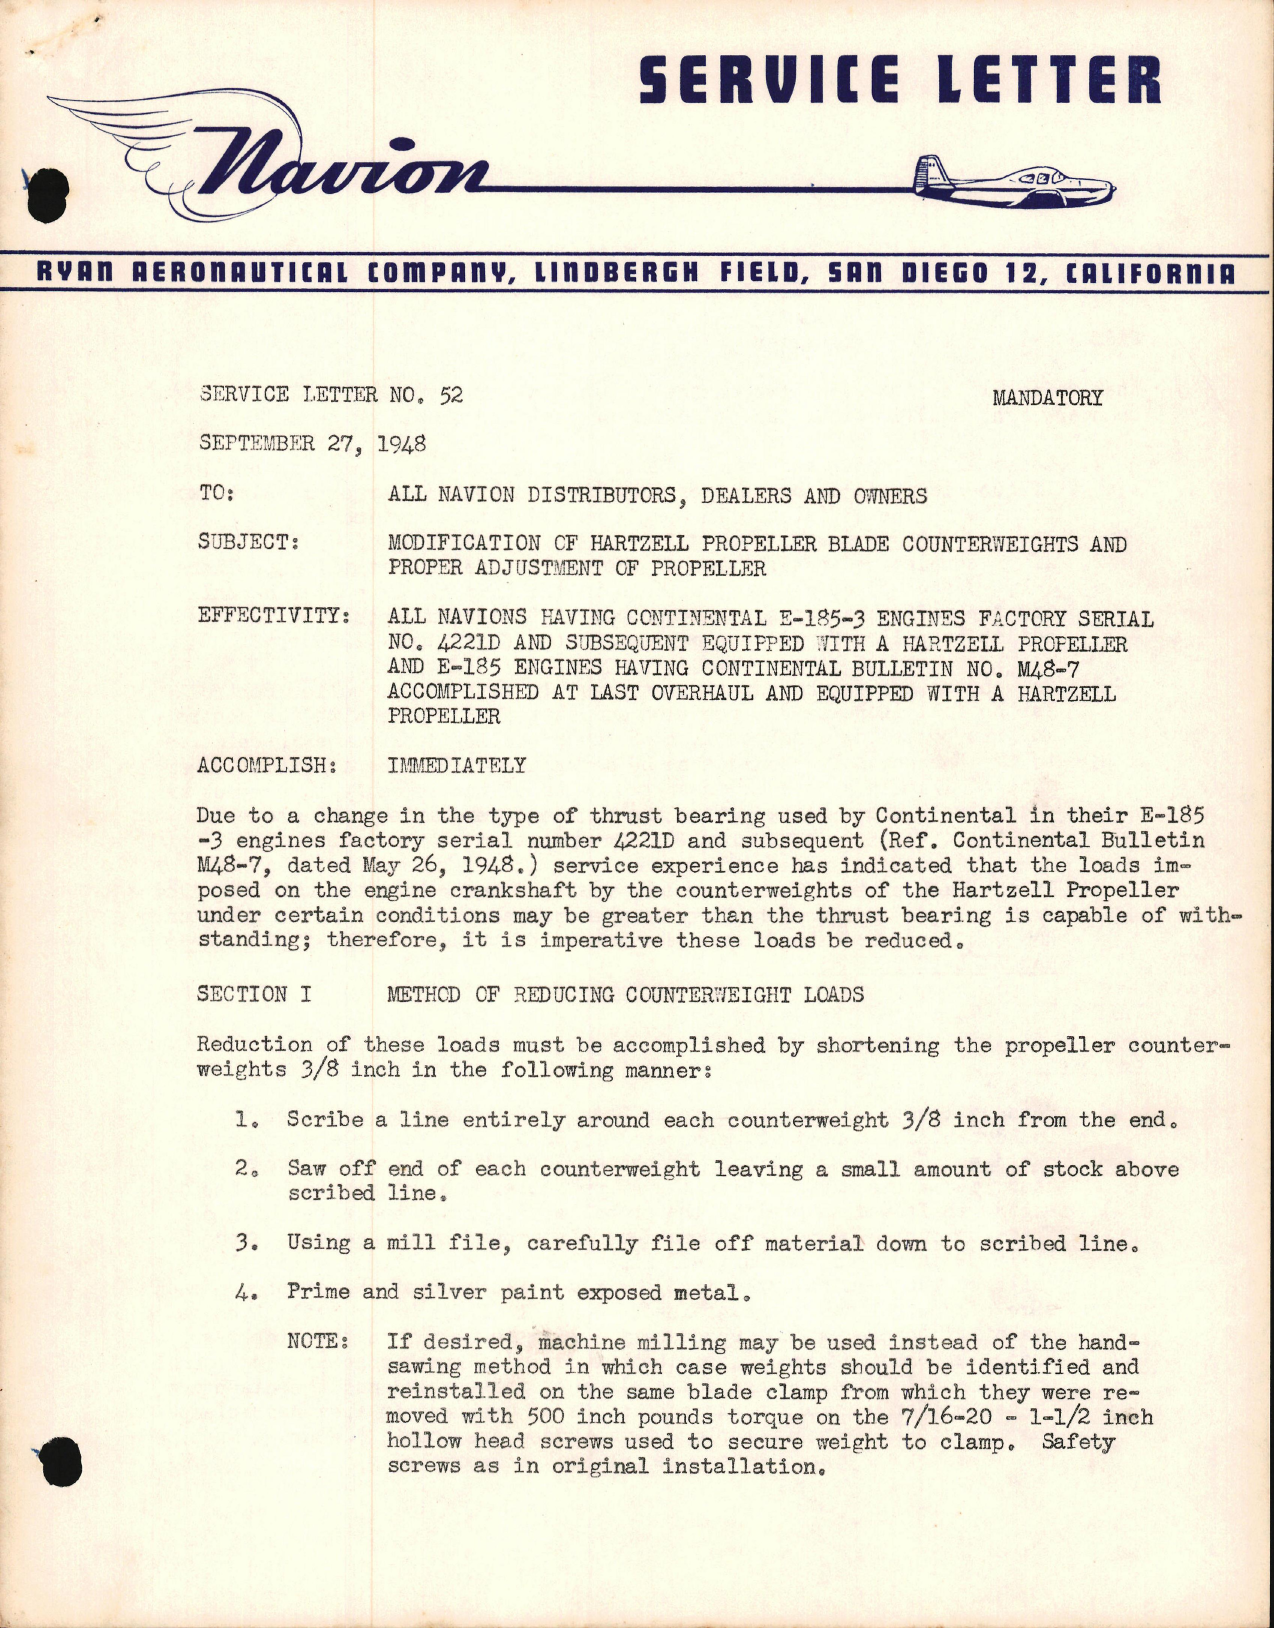 Sample page 1 from AirCorps Library document: Modification of Hartzell Propeller Blade Counterweights and Proper Adjustment of Propeller